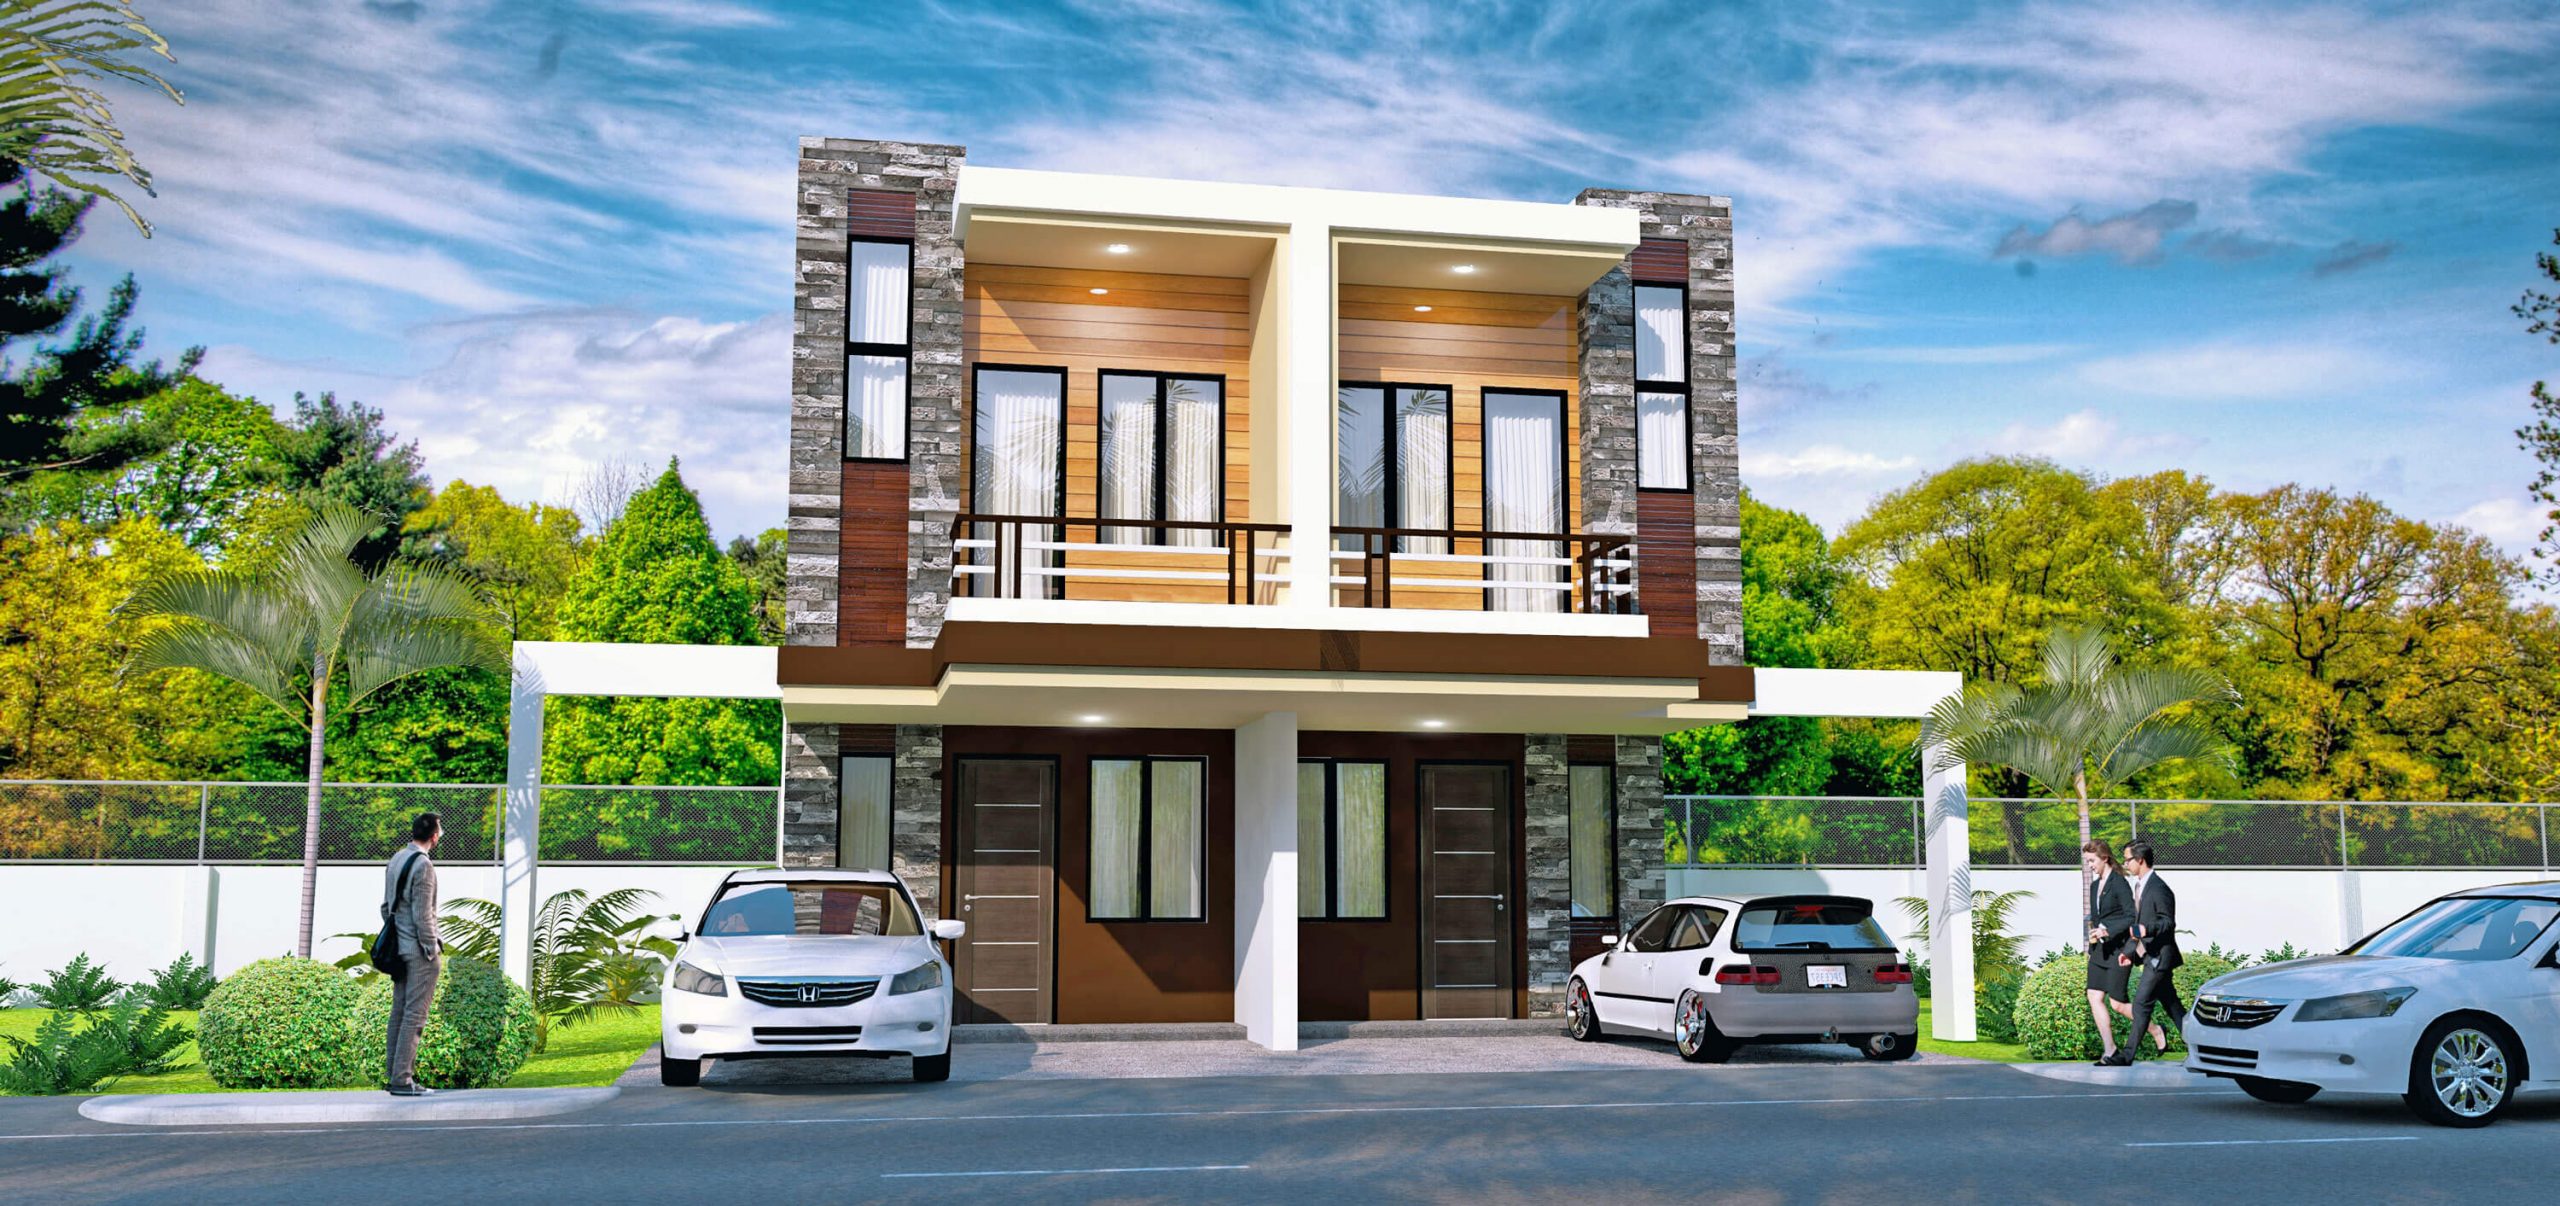 The project has a mix of townhouse, single attached, single detached, and duplex units that range from P3.7 to 5 million.